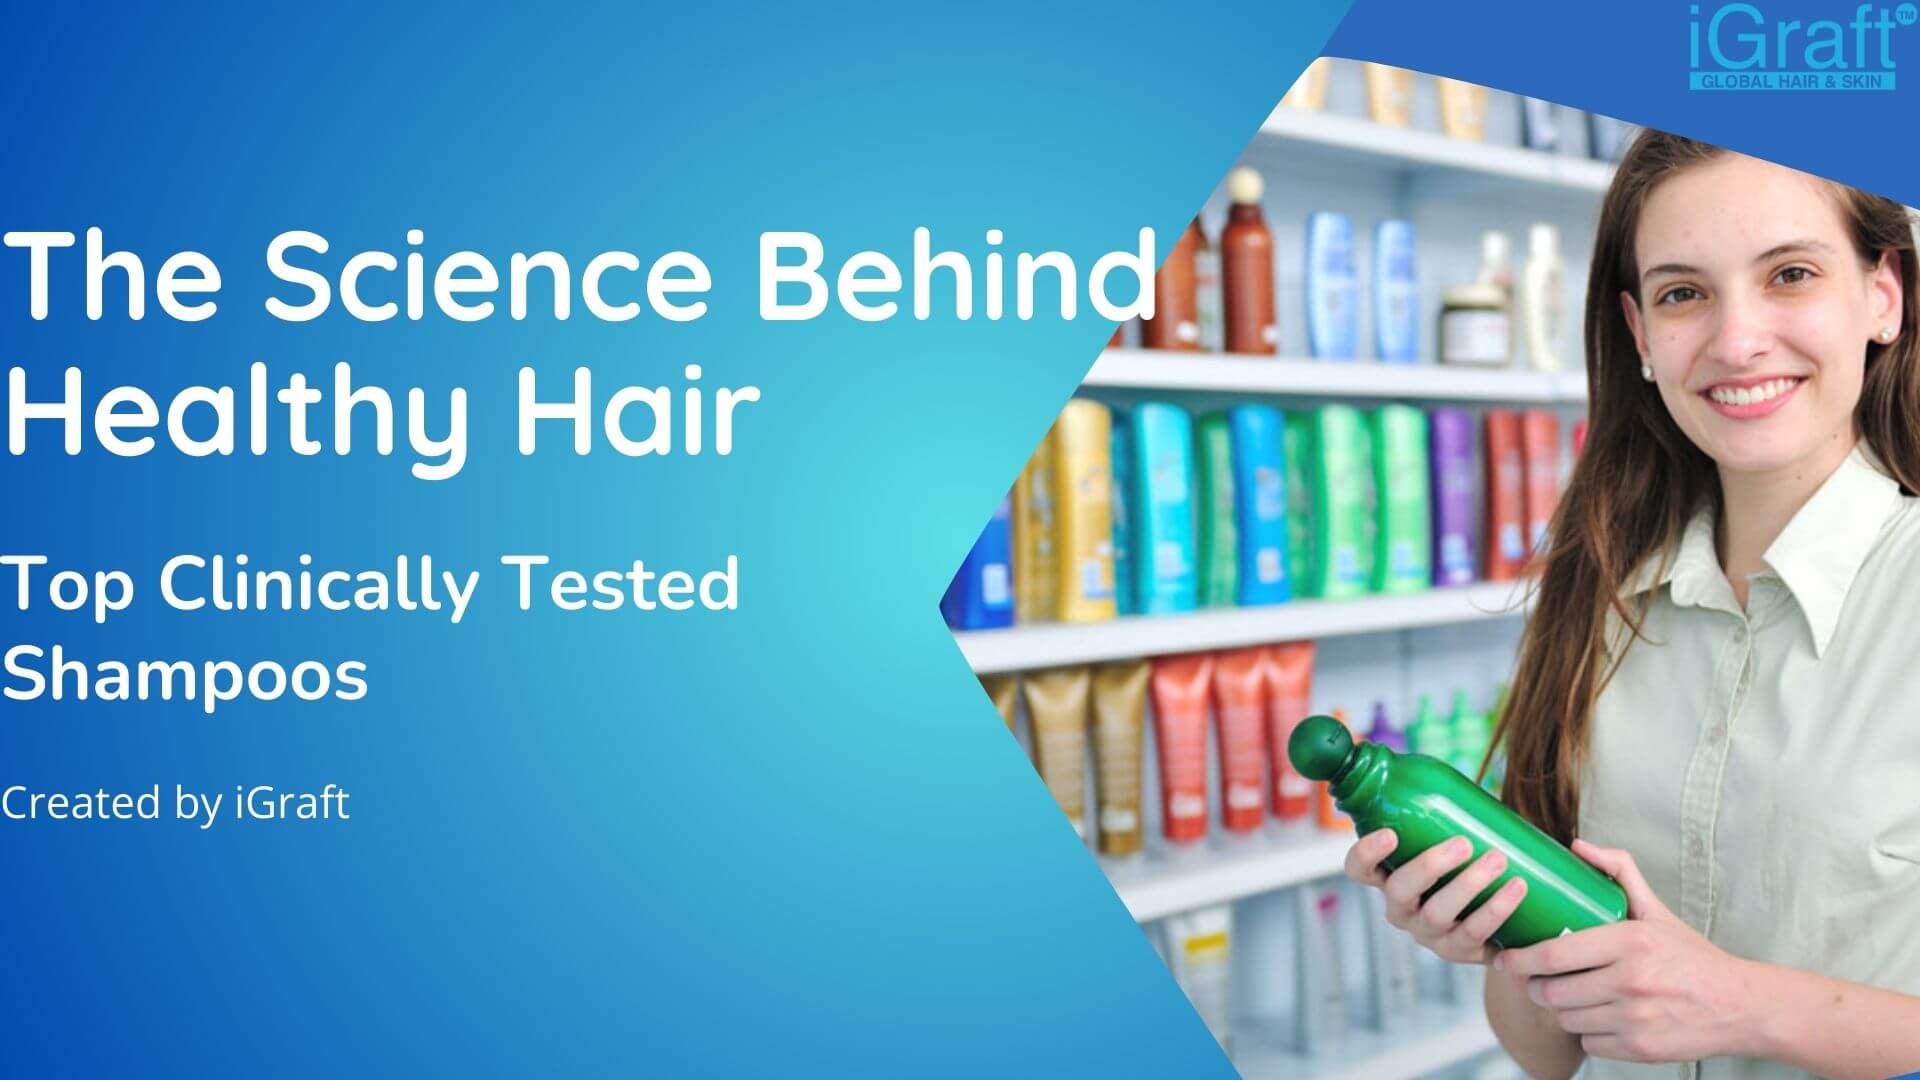 Top Clinically Tested Shampoos